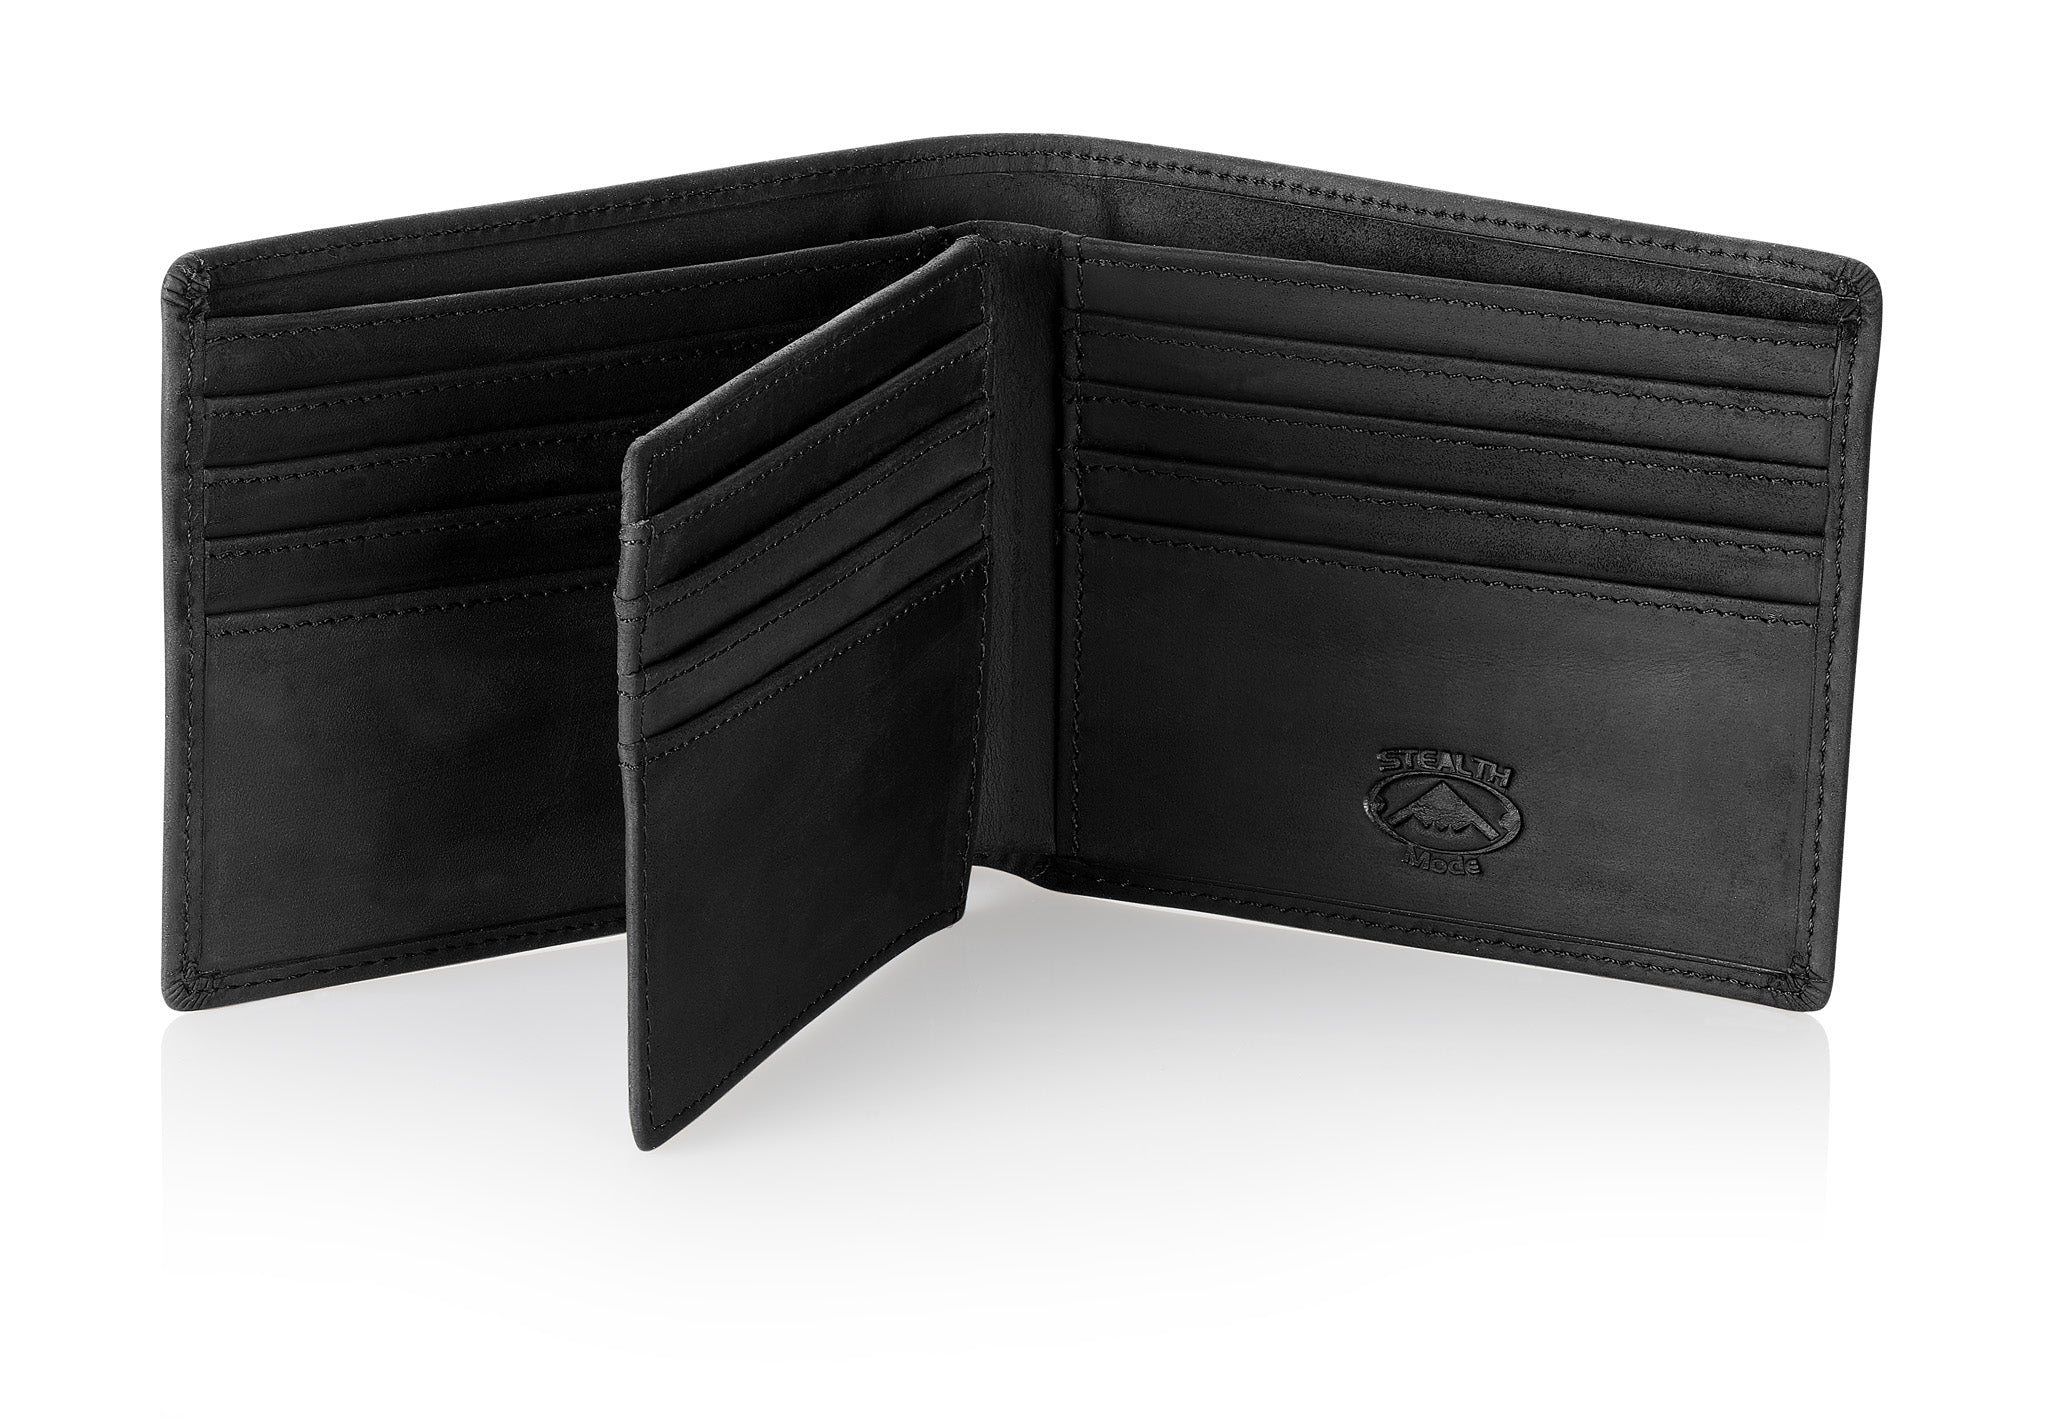 Perfect Fit Bi Fold Wallet with Credit Card Slots and ID Window - Black - 107 Blk CSTM